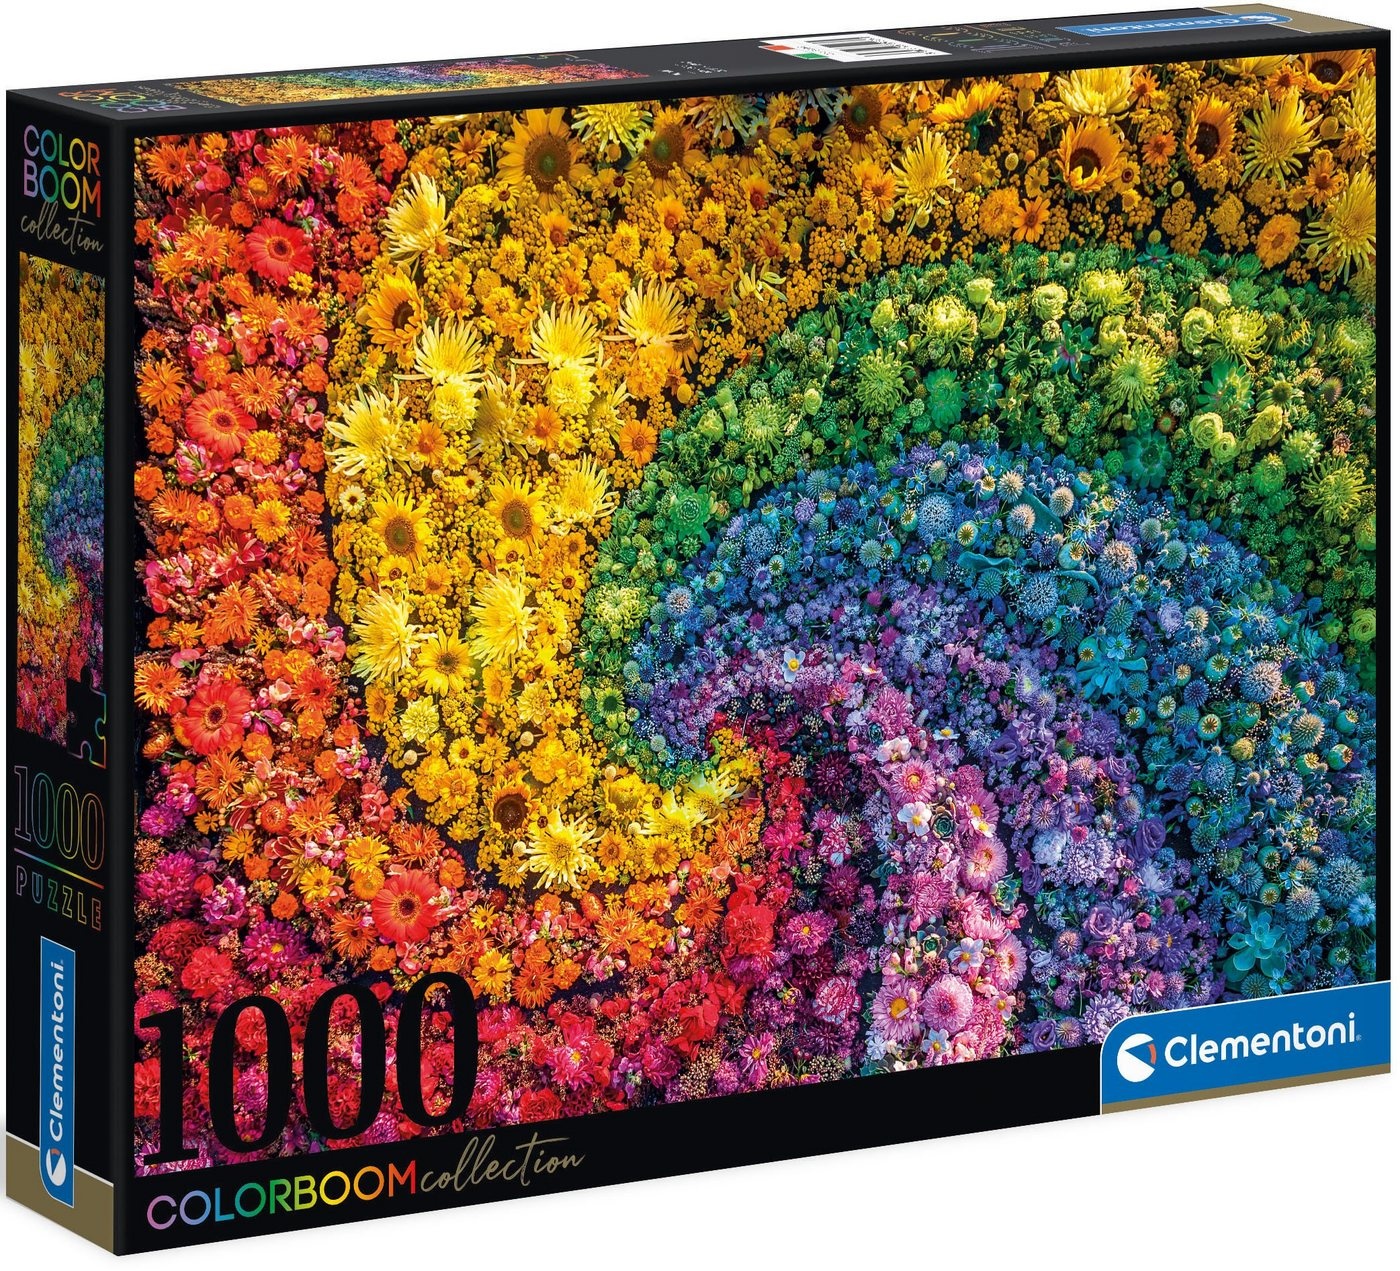 Clementoni® Puzzle Colorboom Collection, Whirl, 1000 Puzzleteile, Made in Europe, FSC® - schützt Wald - weltweit bunt